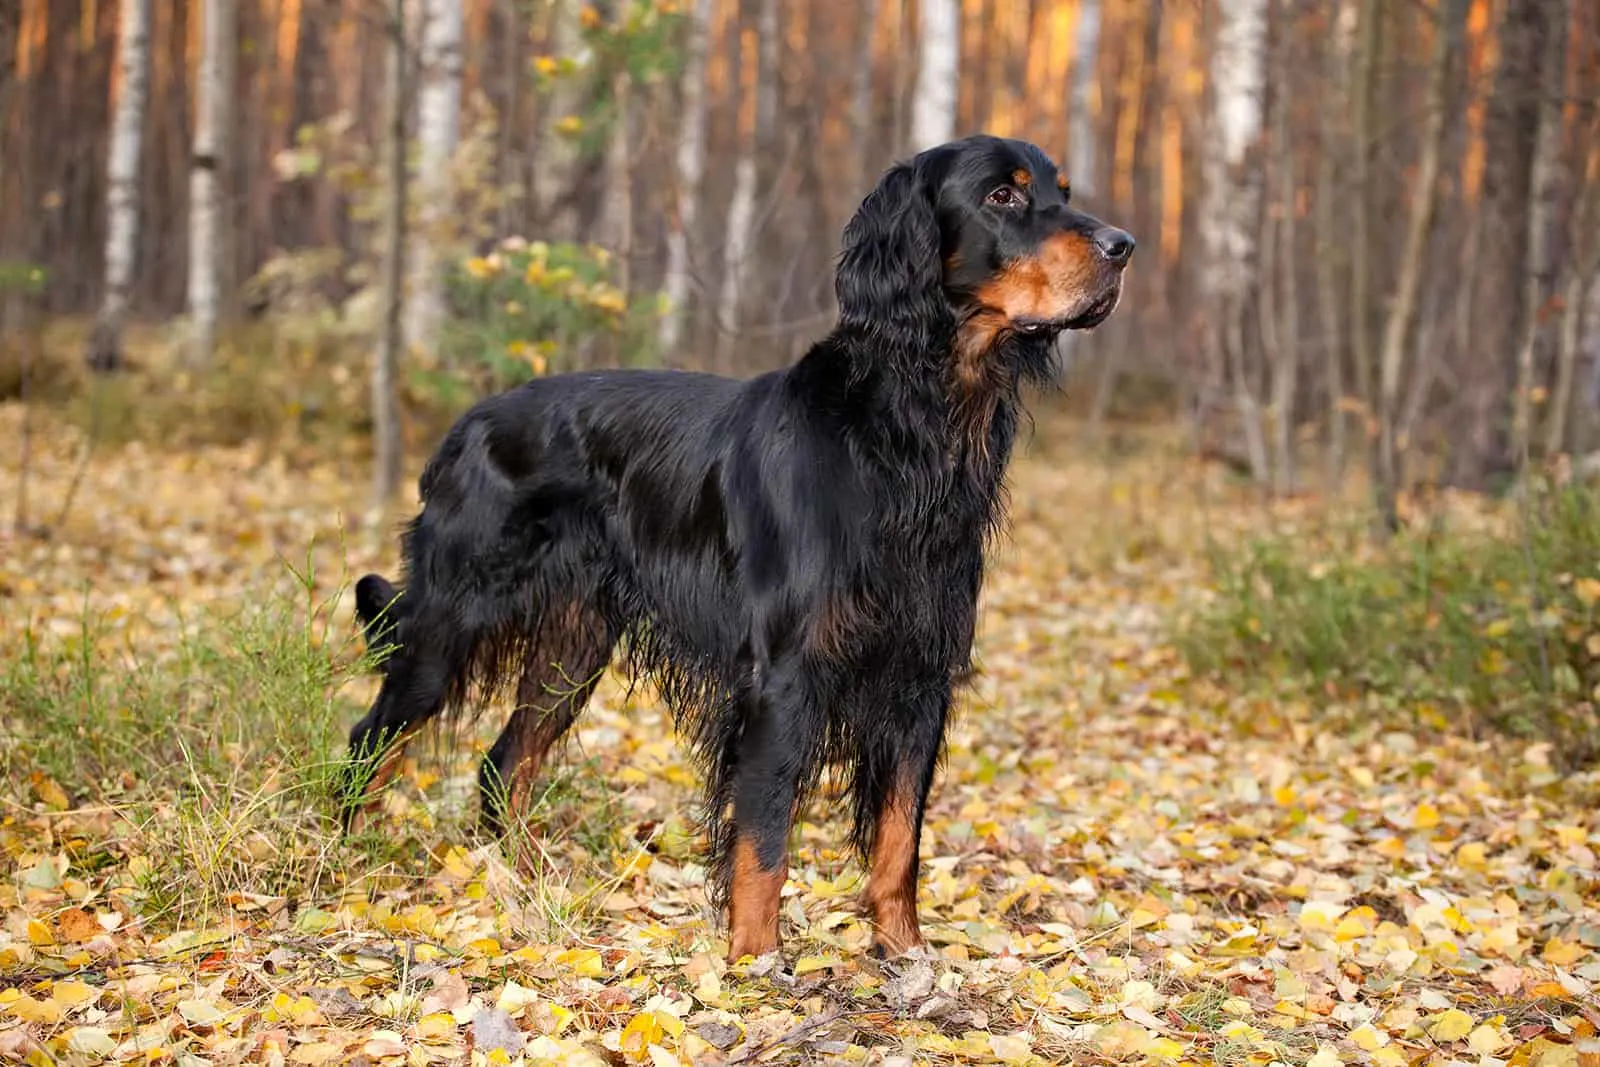 Gordon Setter hunting in the autumn forest